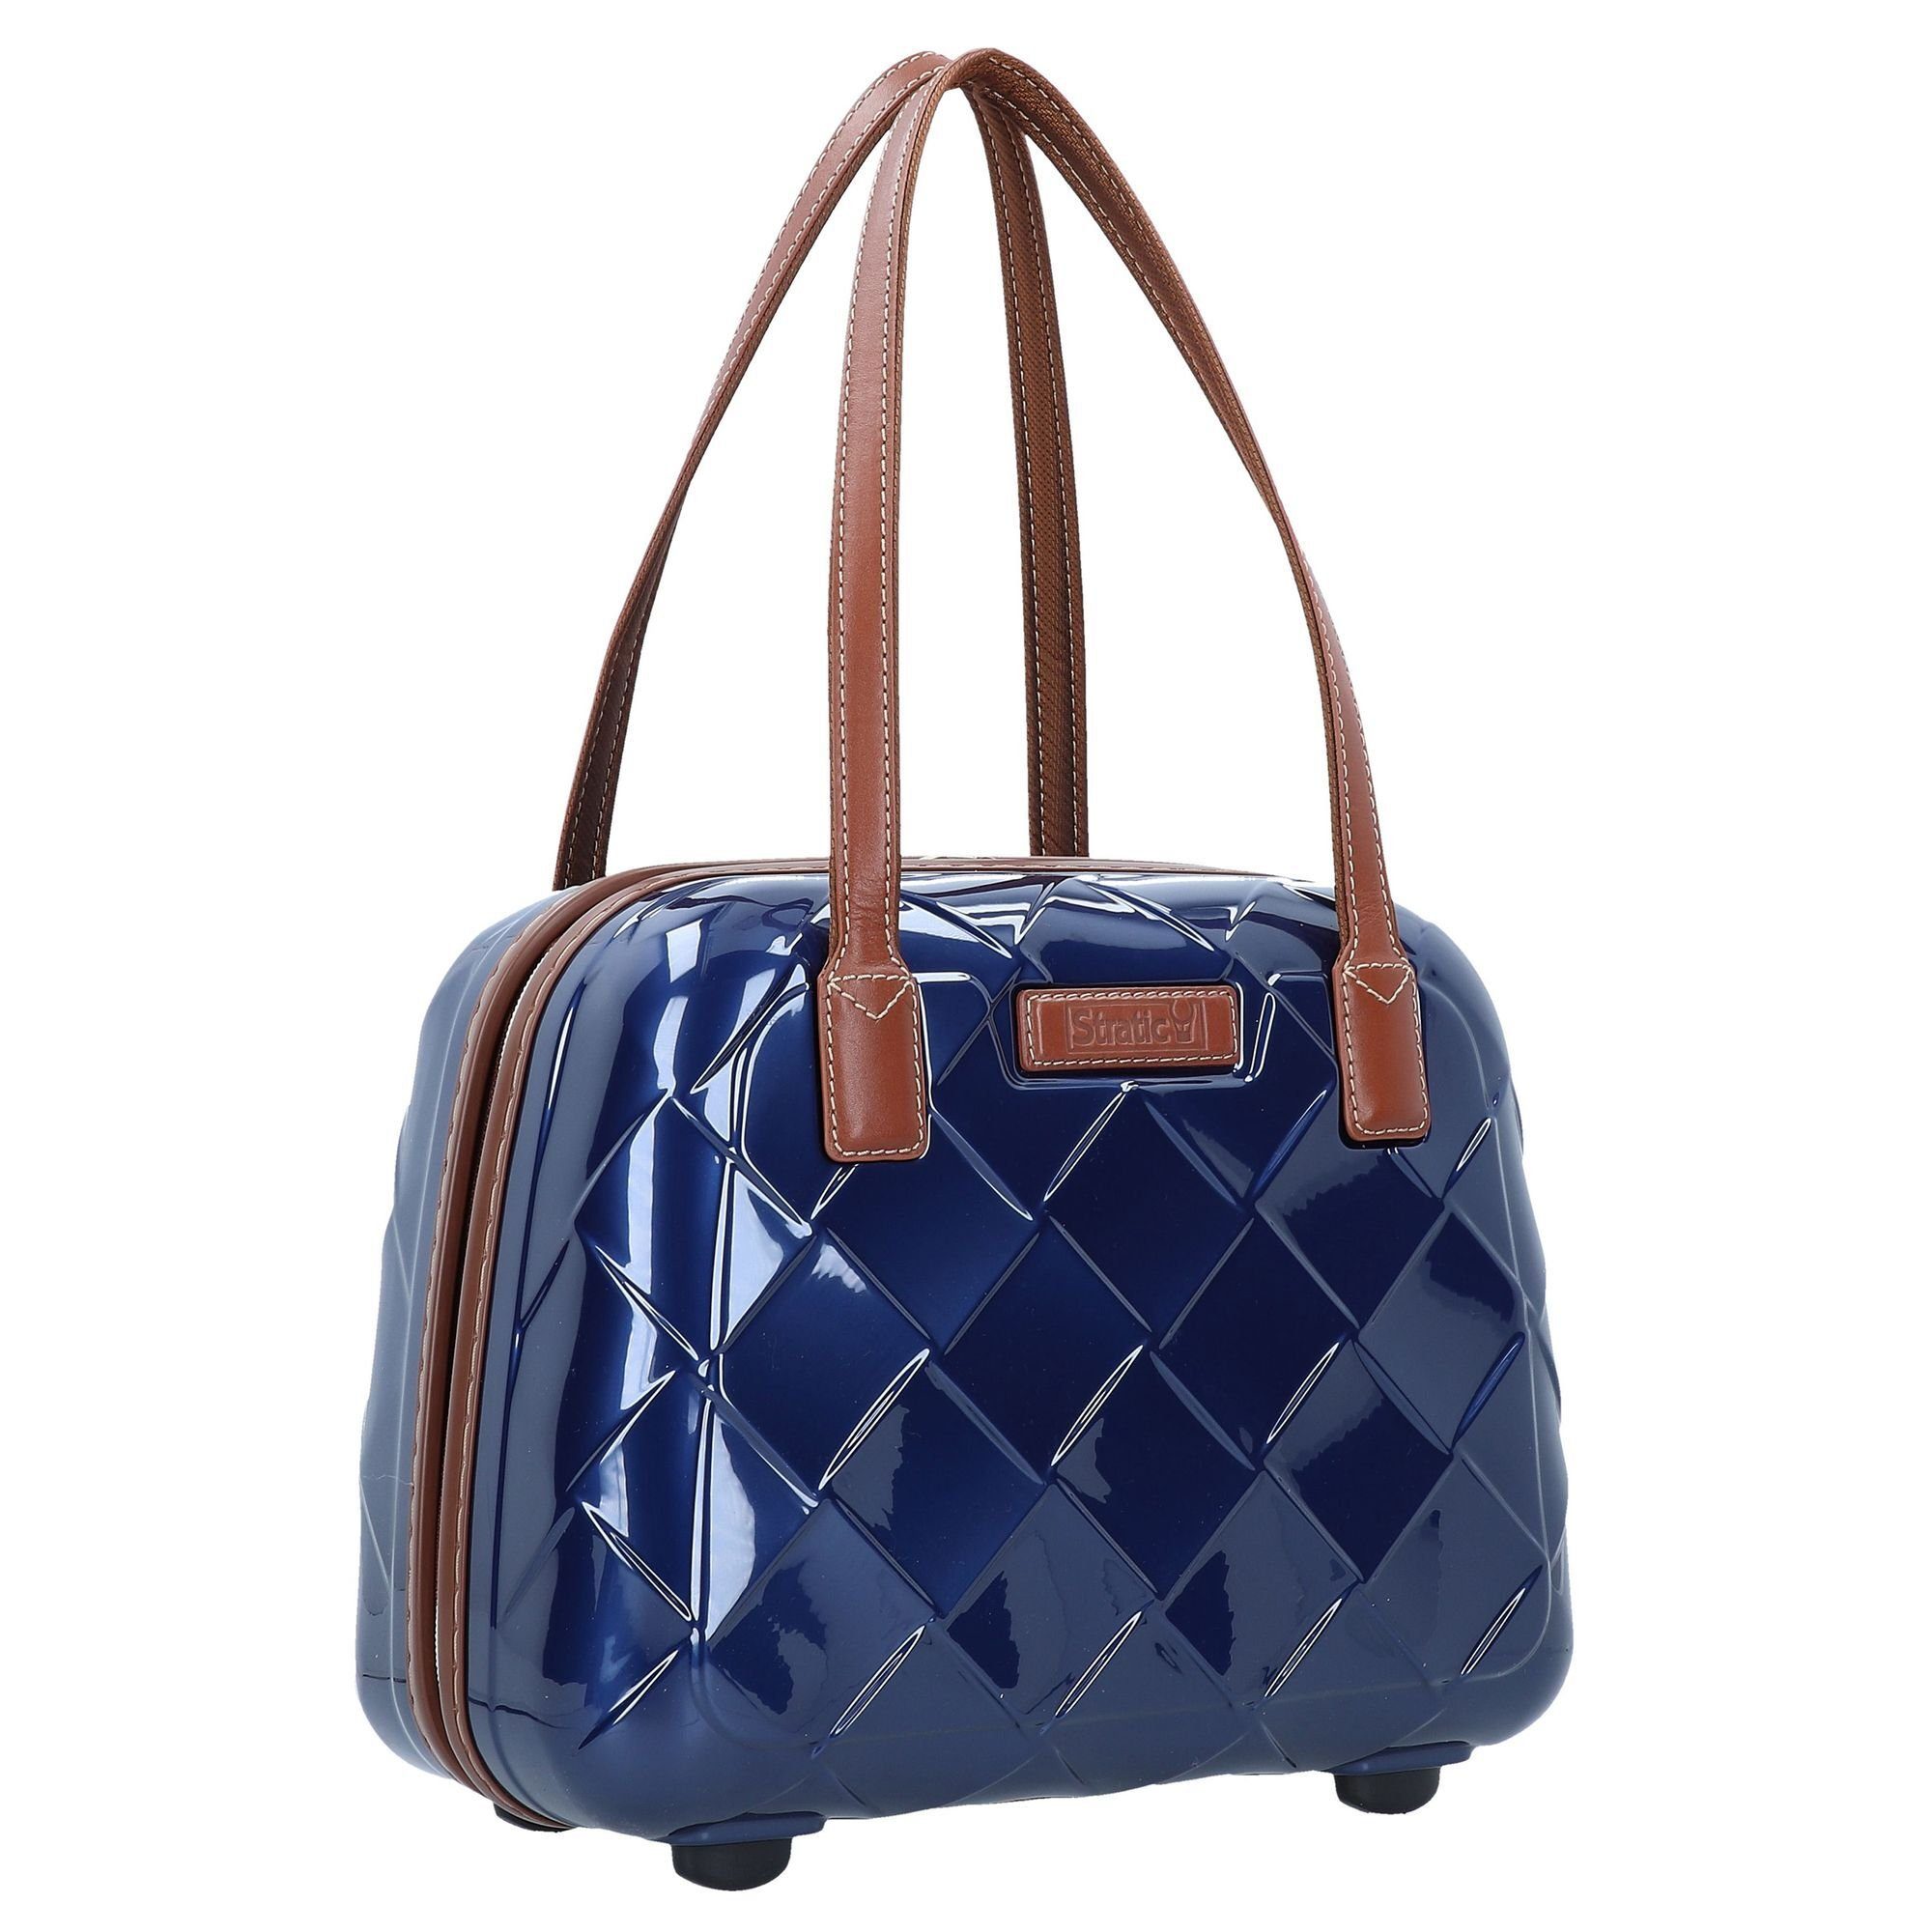 Stratic & Polycarbonat Leather More, Beautycase blau